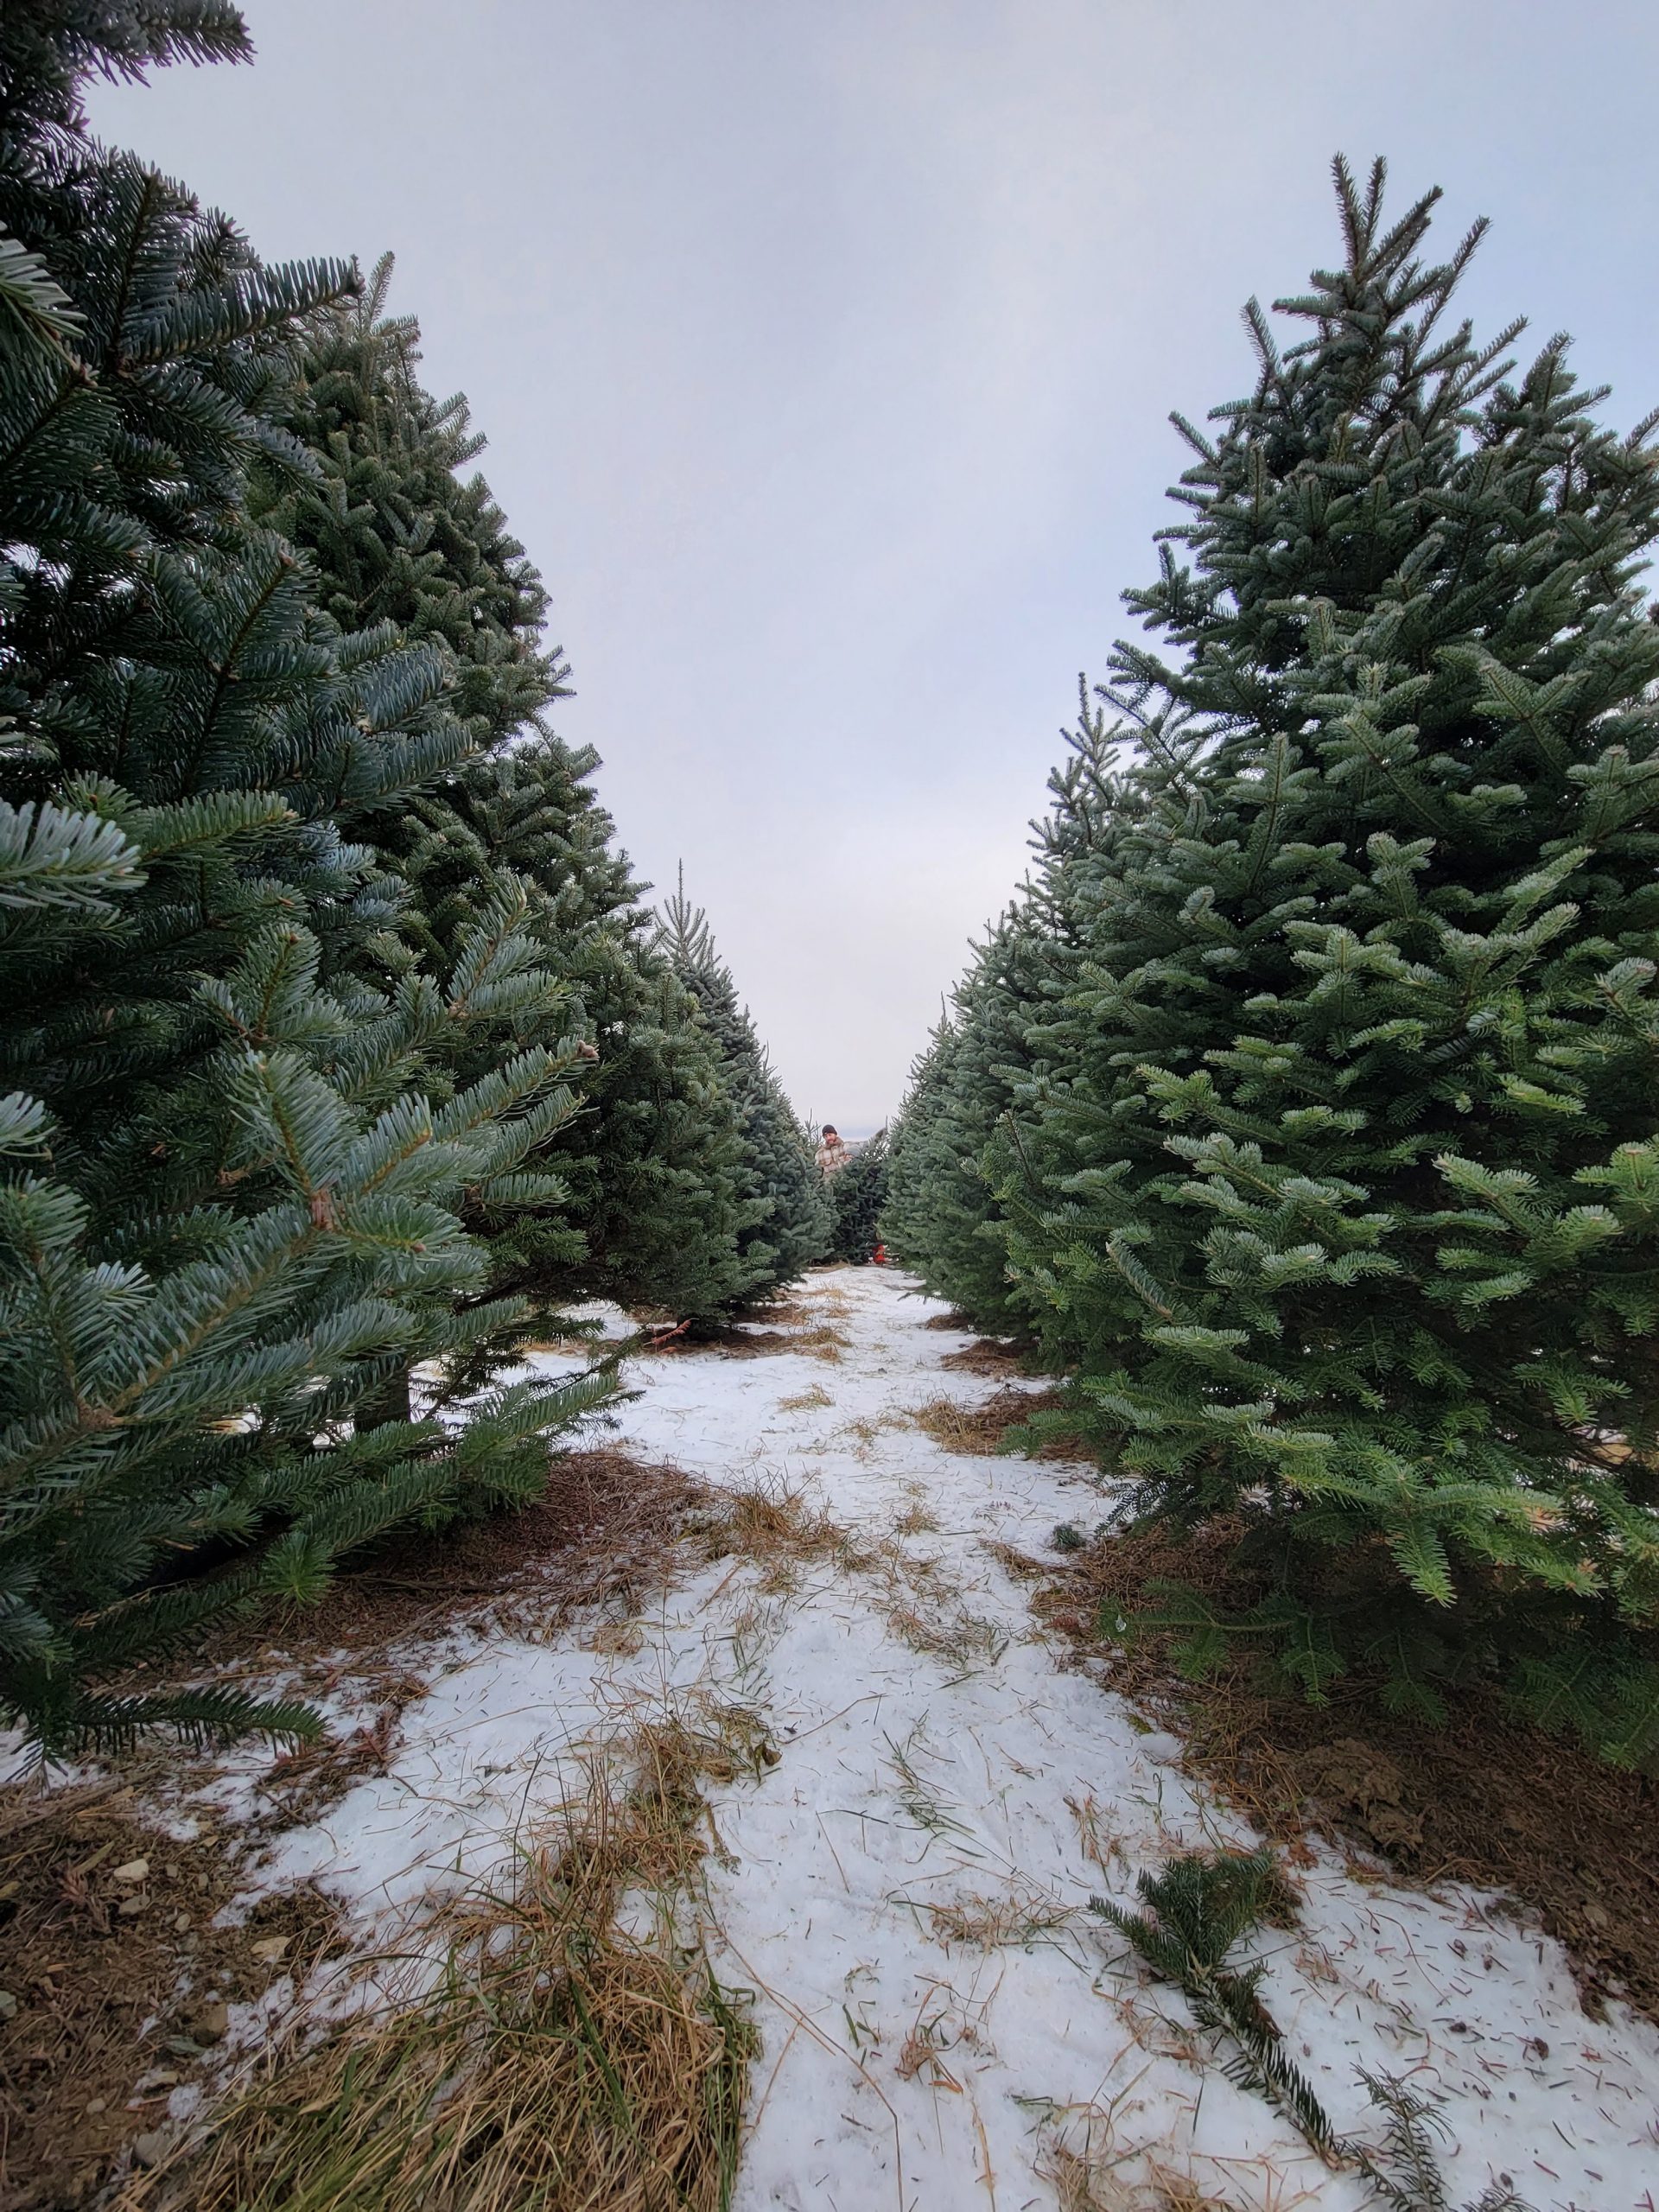 Nationwide supply chain issues lead to higher tree prices - Sherbrooke ...